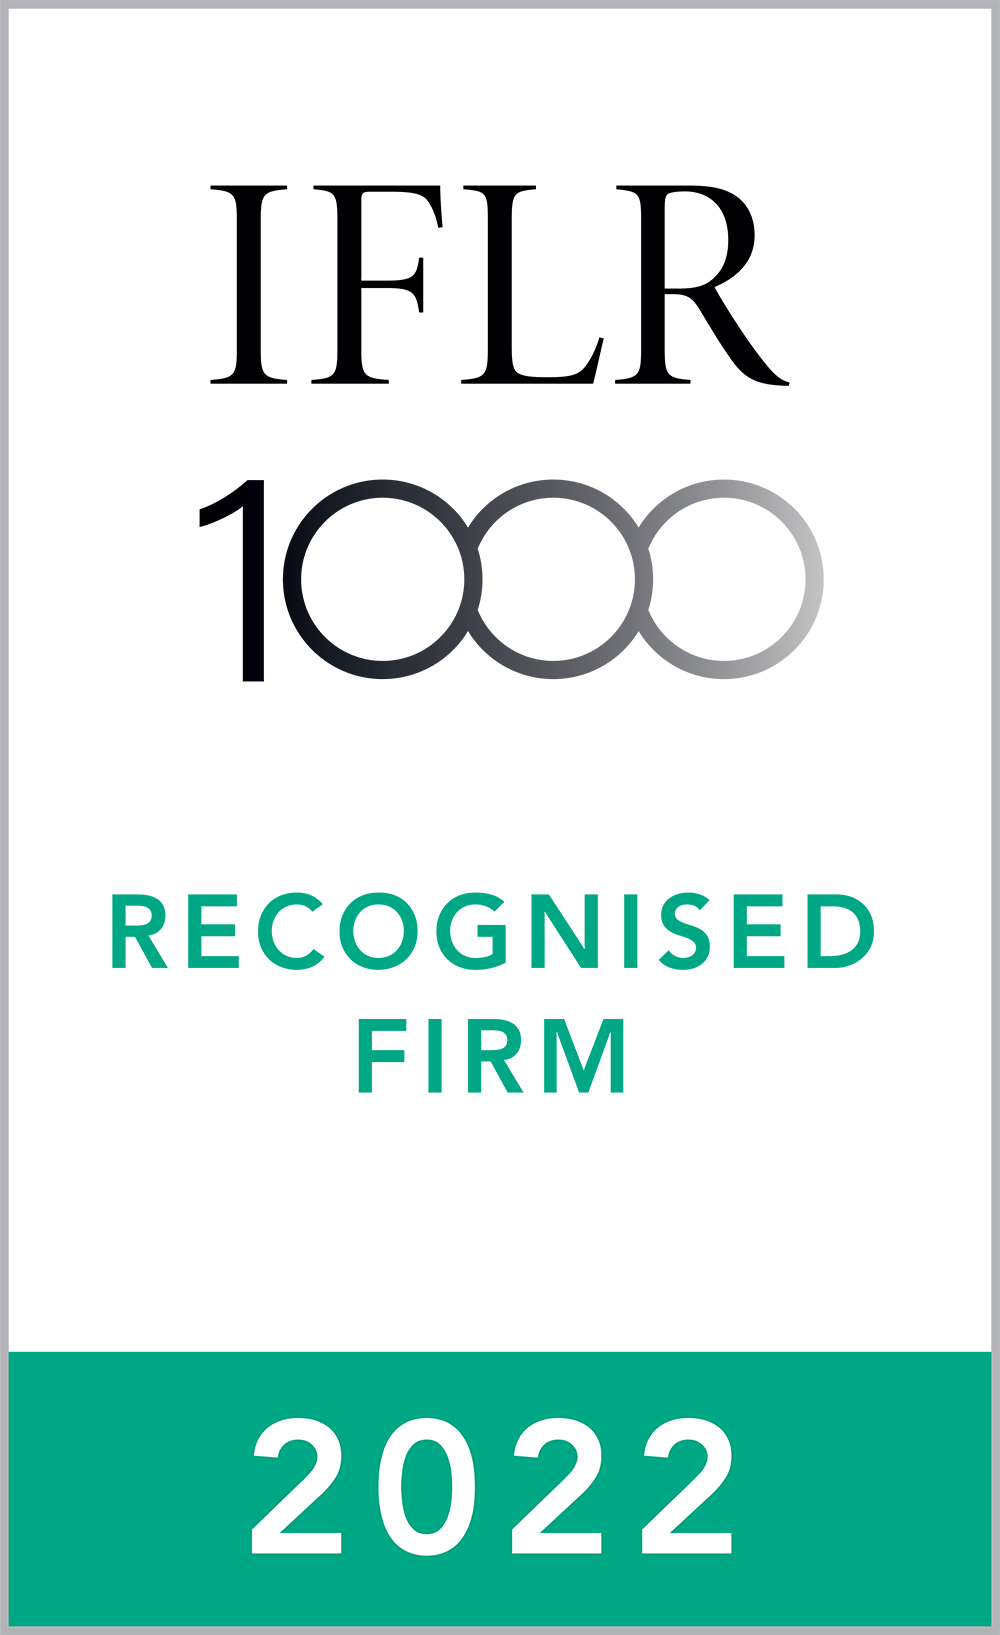 LC Lawyers has been ranked as a Notable Hong Kong law firm in four practice areas by IFLR1000 2022-23 edition